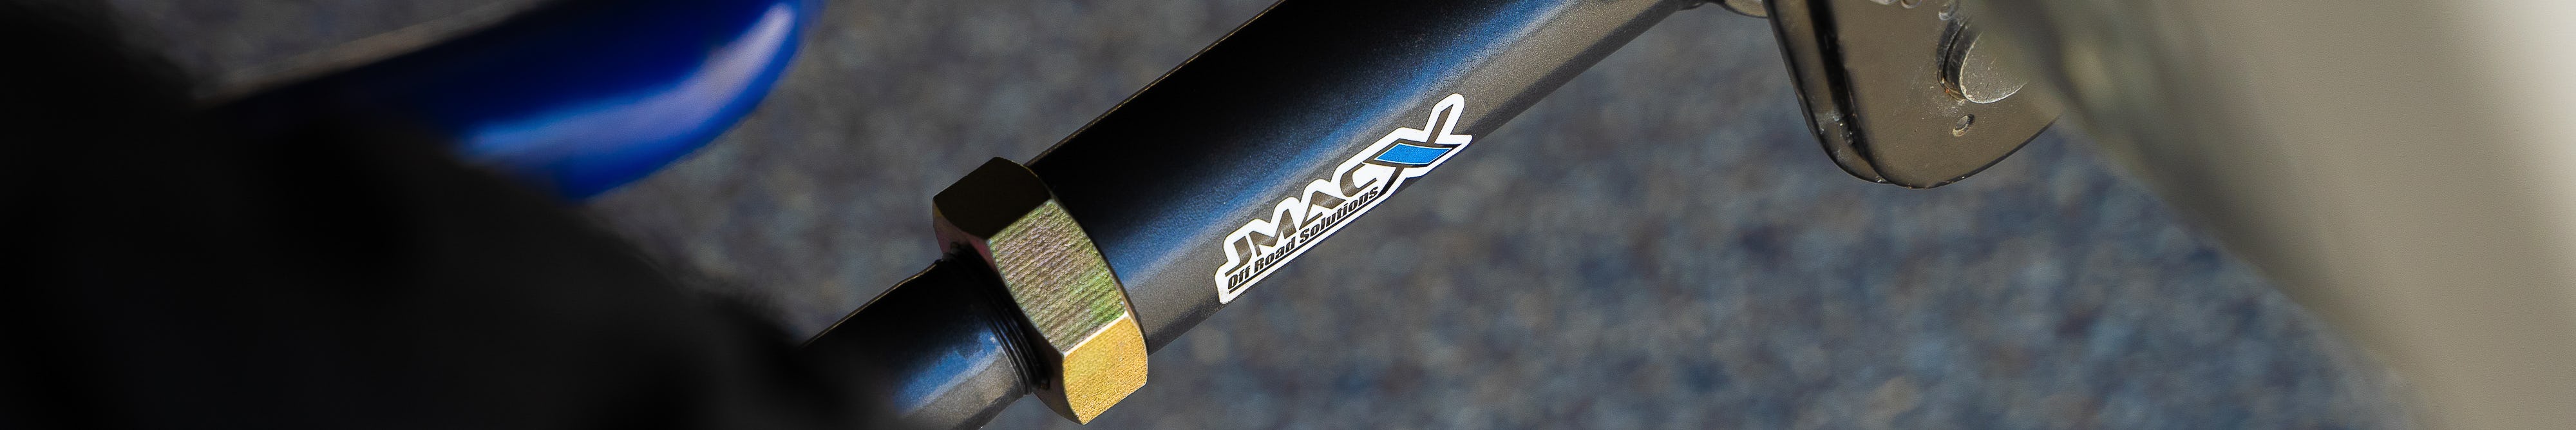 JMACX element used in customising Curt's 79 Series build